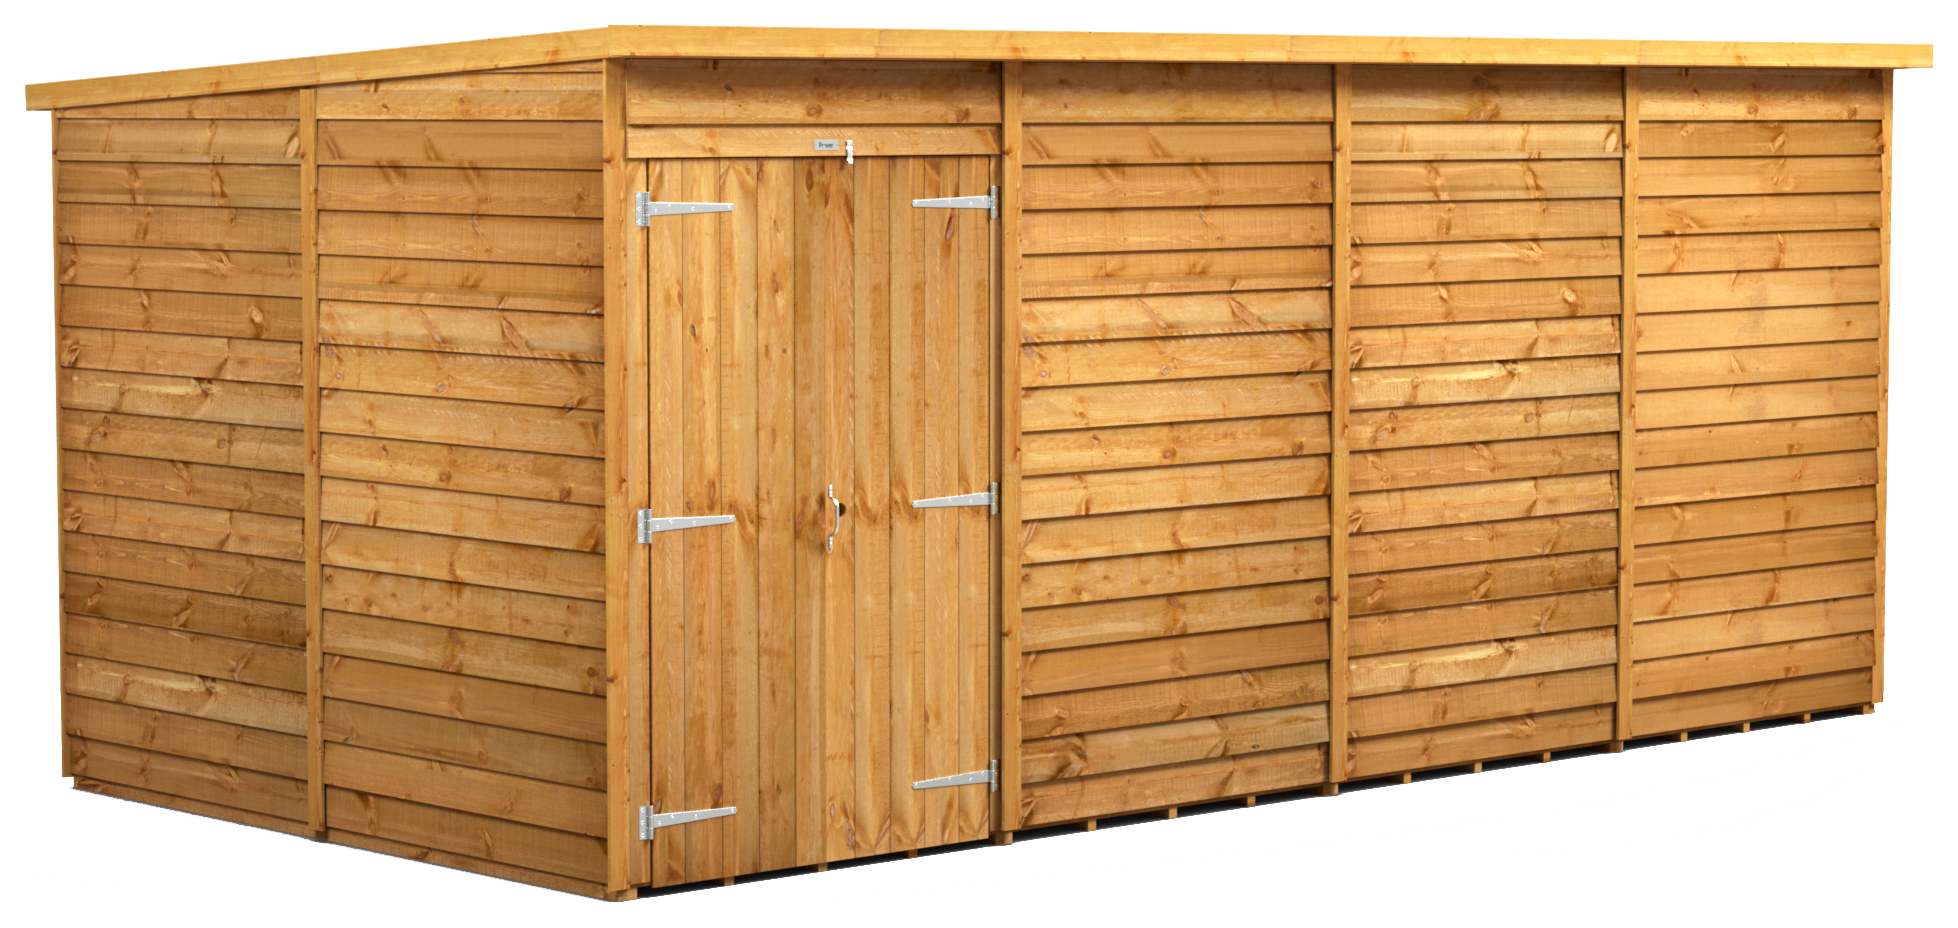 Power Sheds Double Door Pent Overlap Dip Treated Windowless Shed - 16 x 8ft